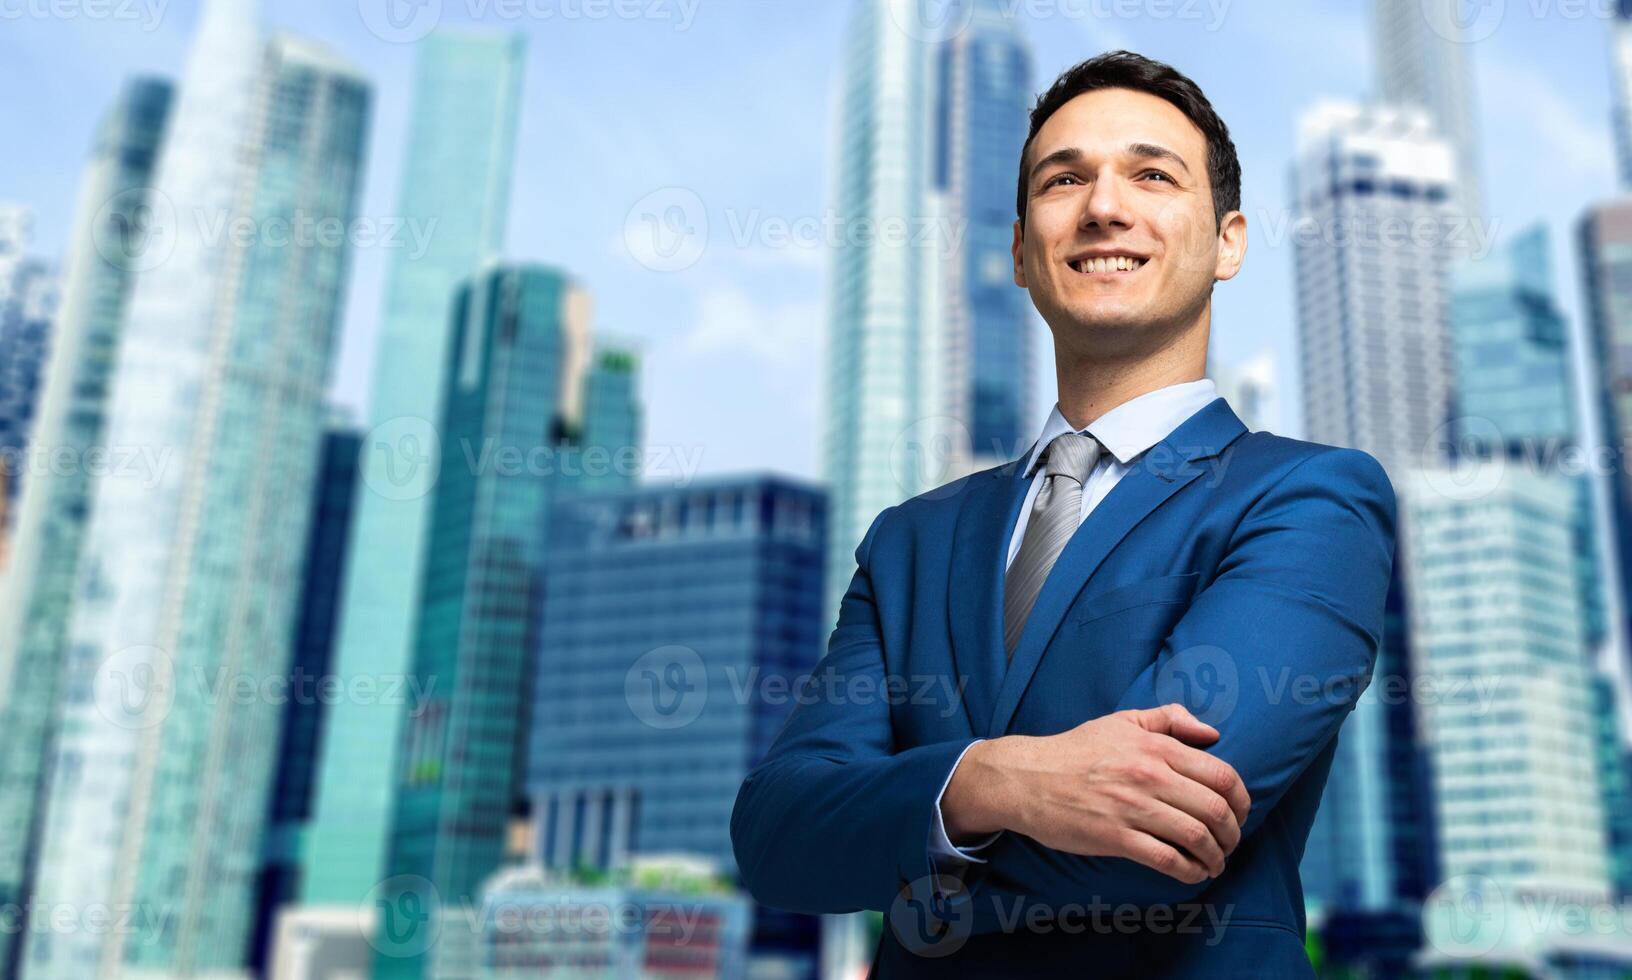 Businessman outdoor smiling confidently with a metropolis in the background photo